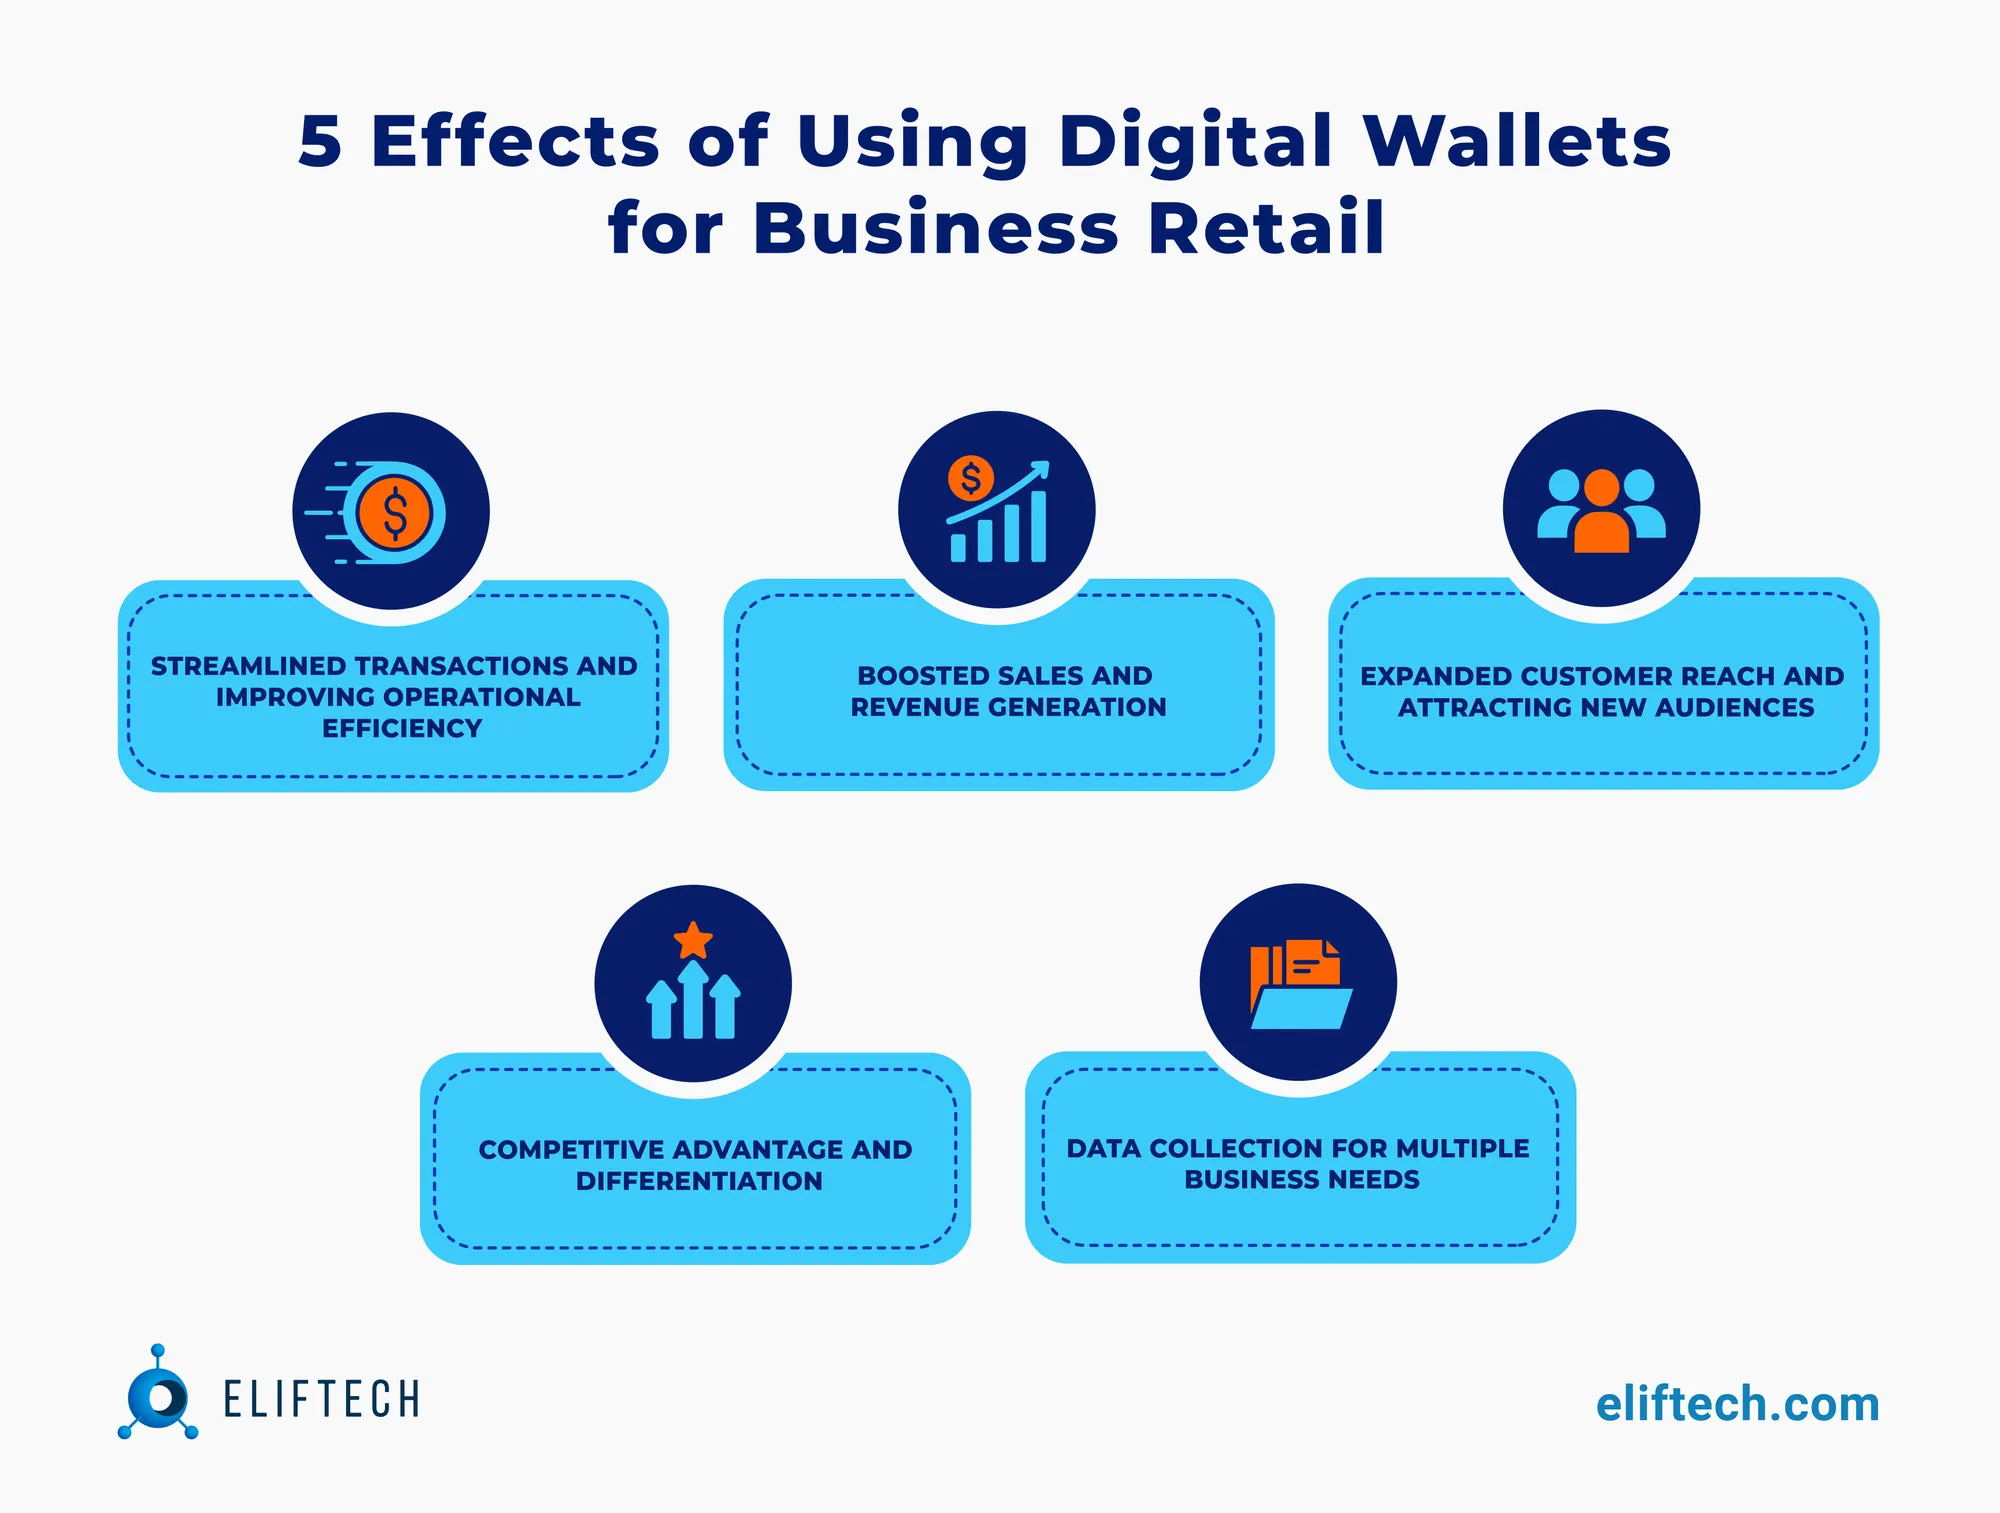 Effects of Using Digital Wallets for a Retail Business